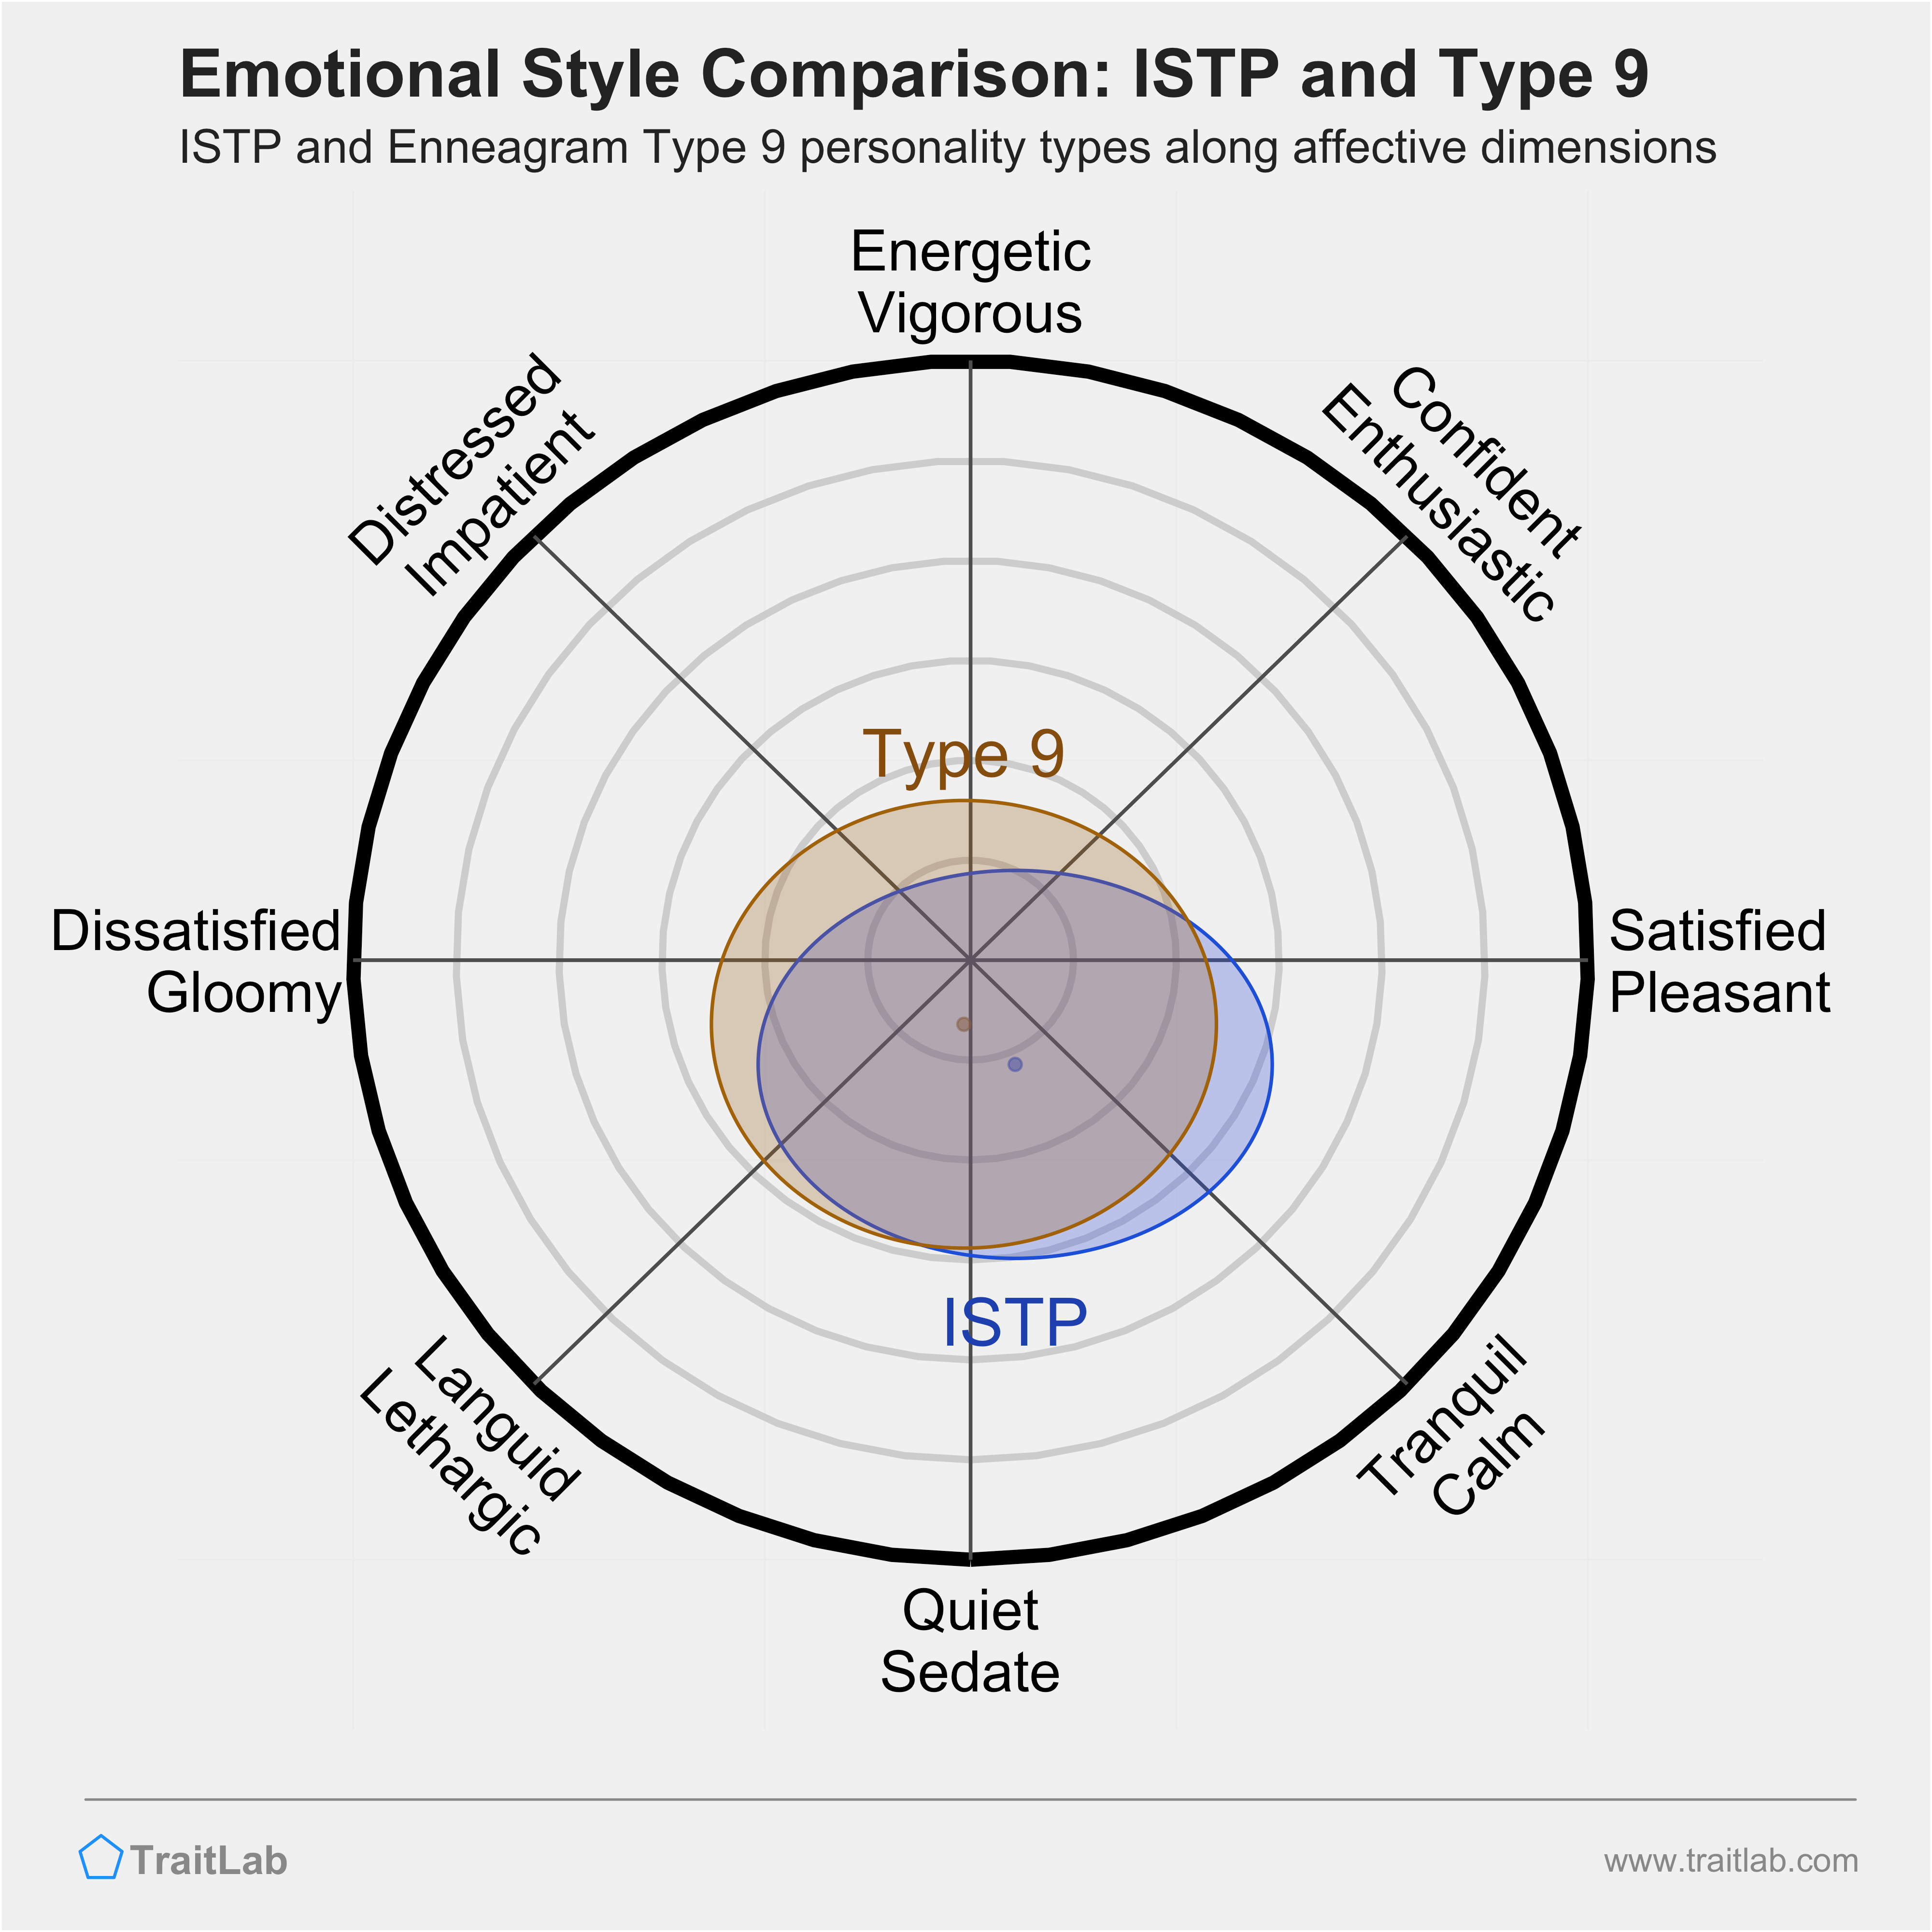 ISTP and Type 9 comparison across emotional (affective) dimensions